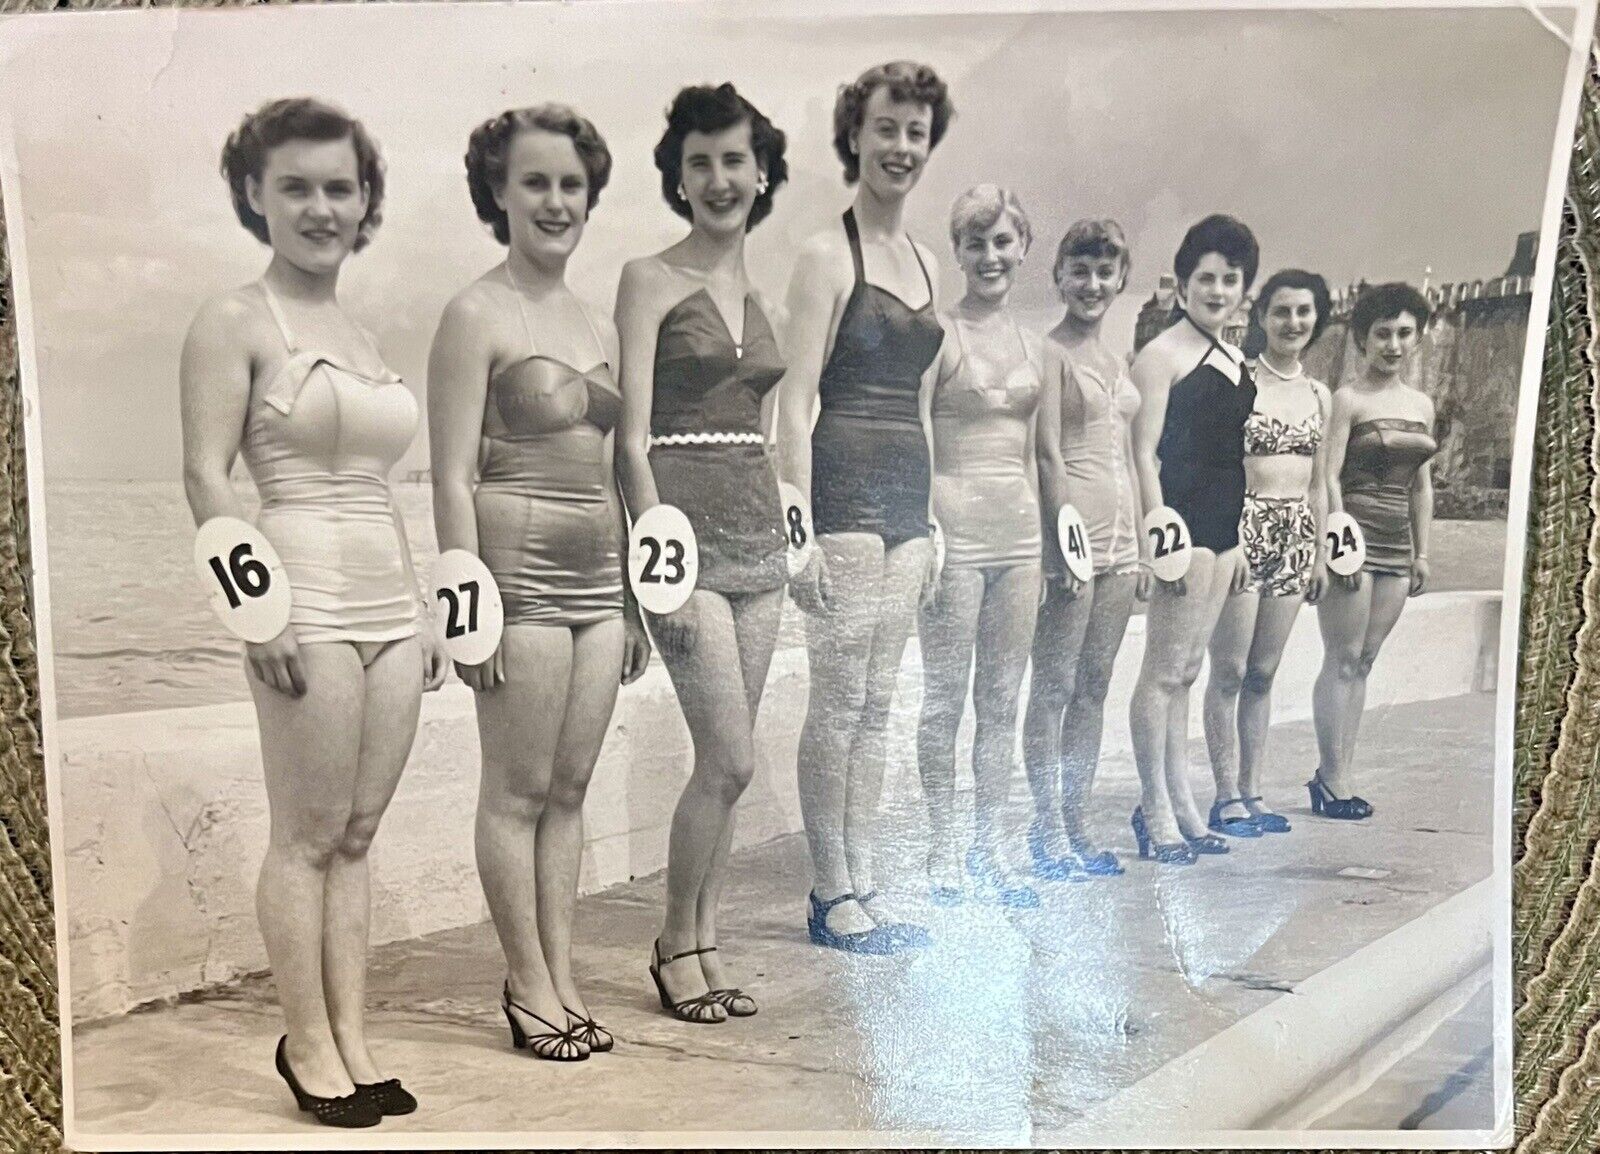 Antique Female  Bathing  Beauty Contest of (9) Contestants from sunbeam photo